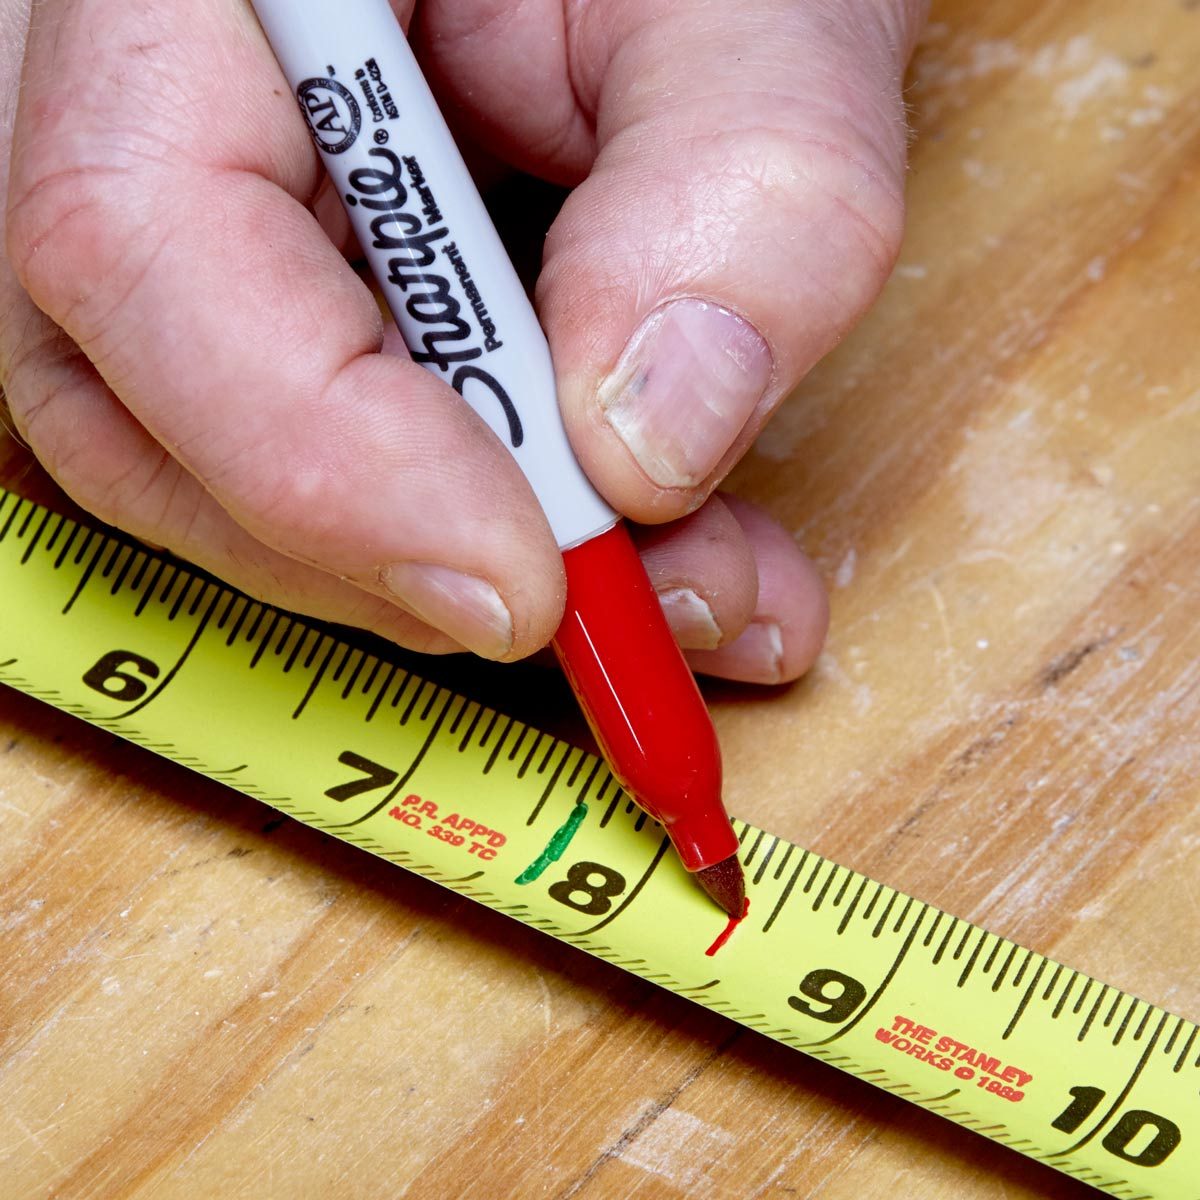 5 Hidden Features of Your Tape Measure Tool